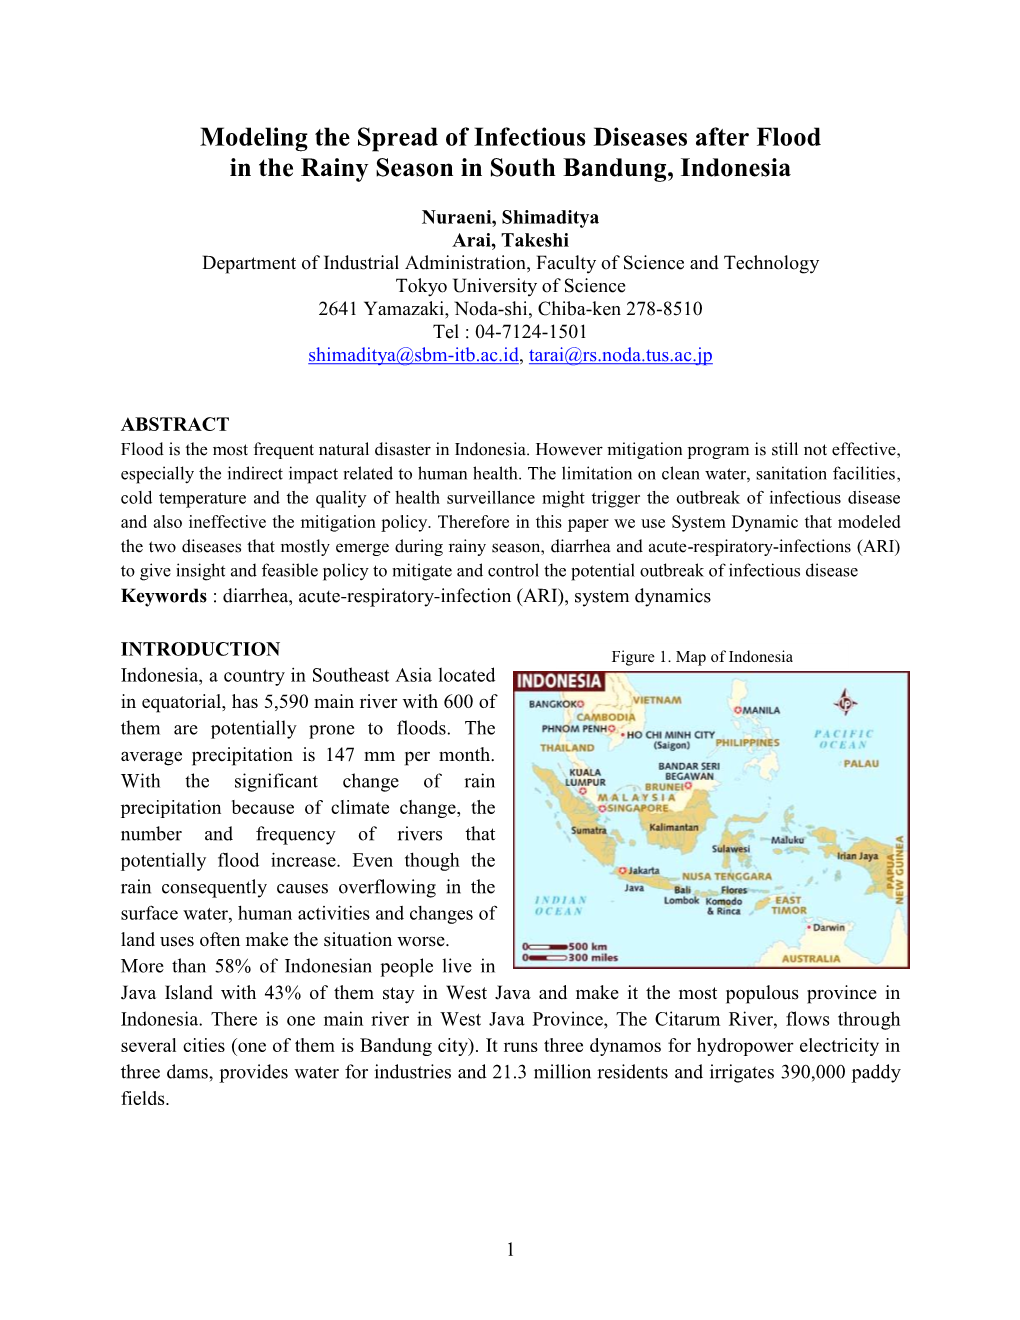 Modeling the Spread of Infectious Diseases After Flood in the Rainy Season in South Bandung, Indonesia